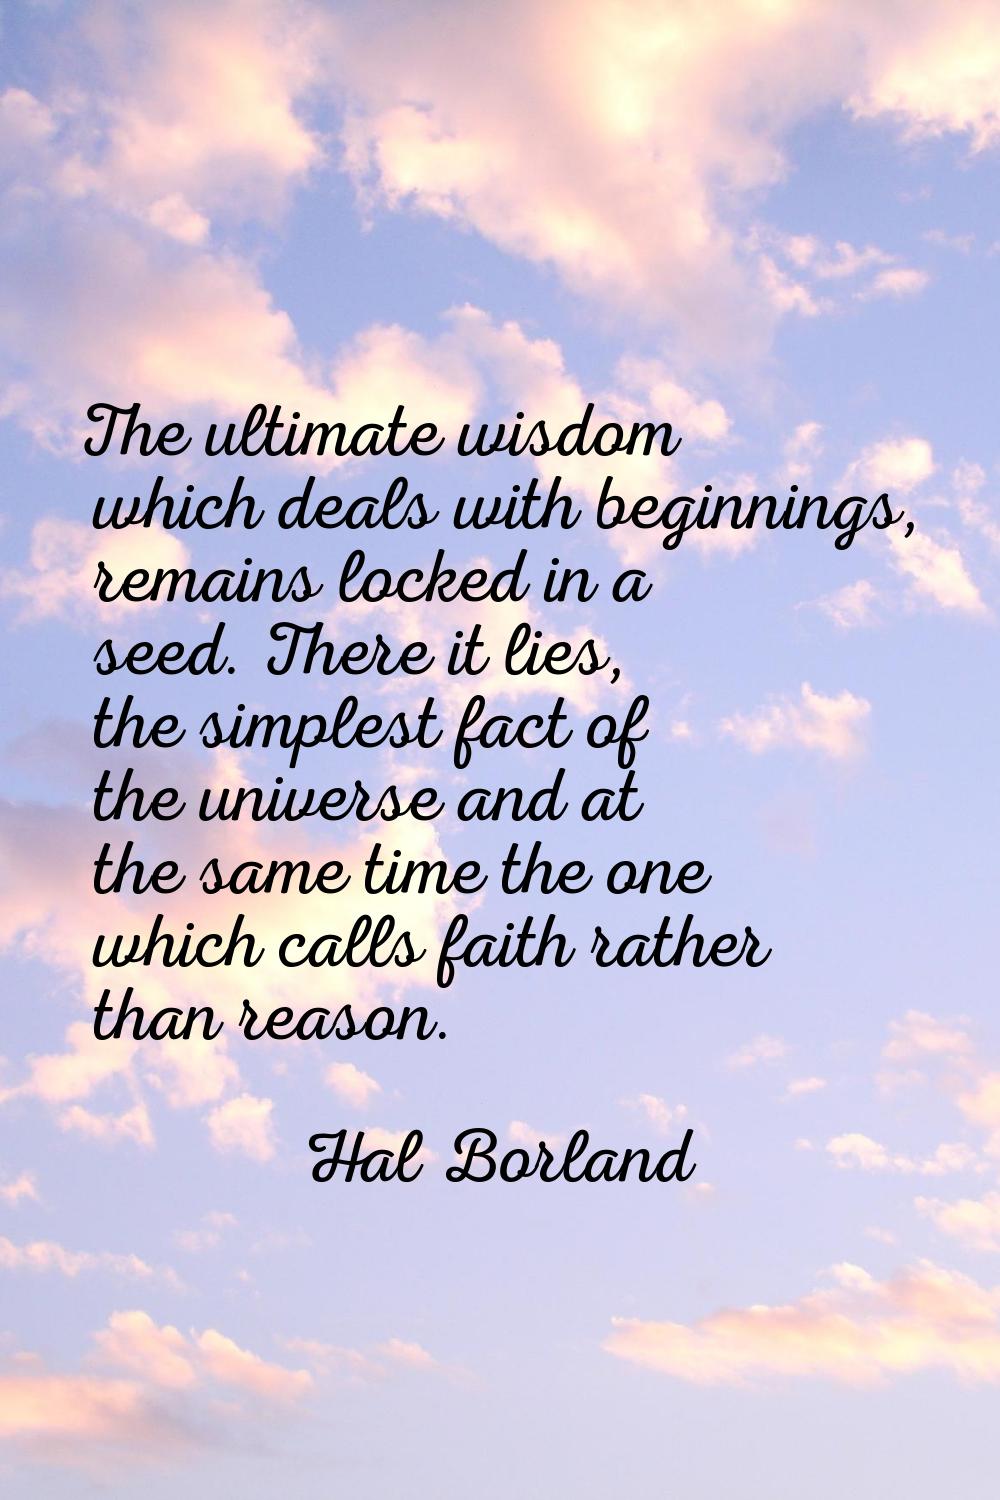 The ultimate wisdom which deals with beginnings, remains locked in a seed. There it lies, the simpl